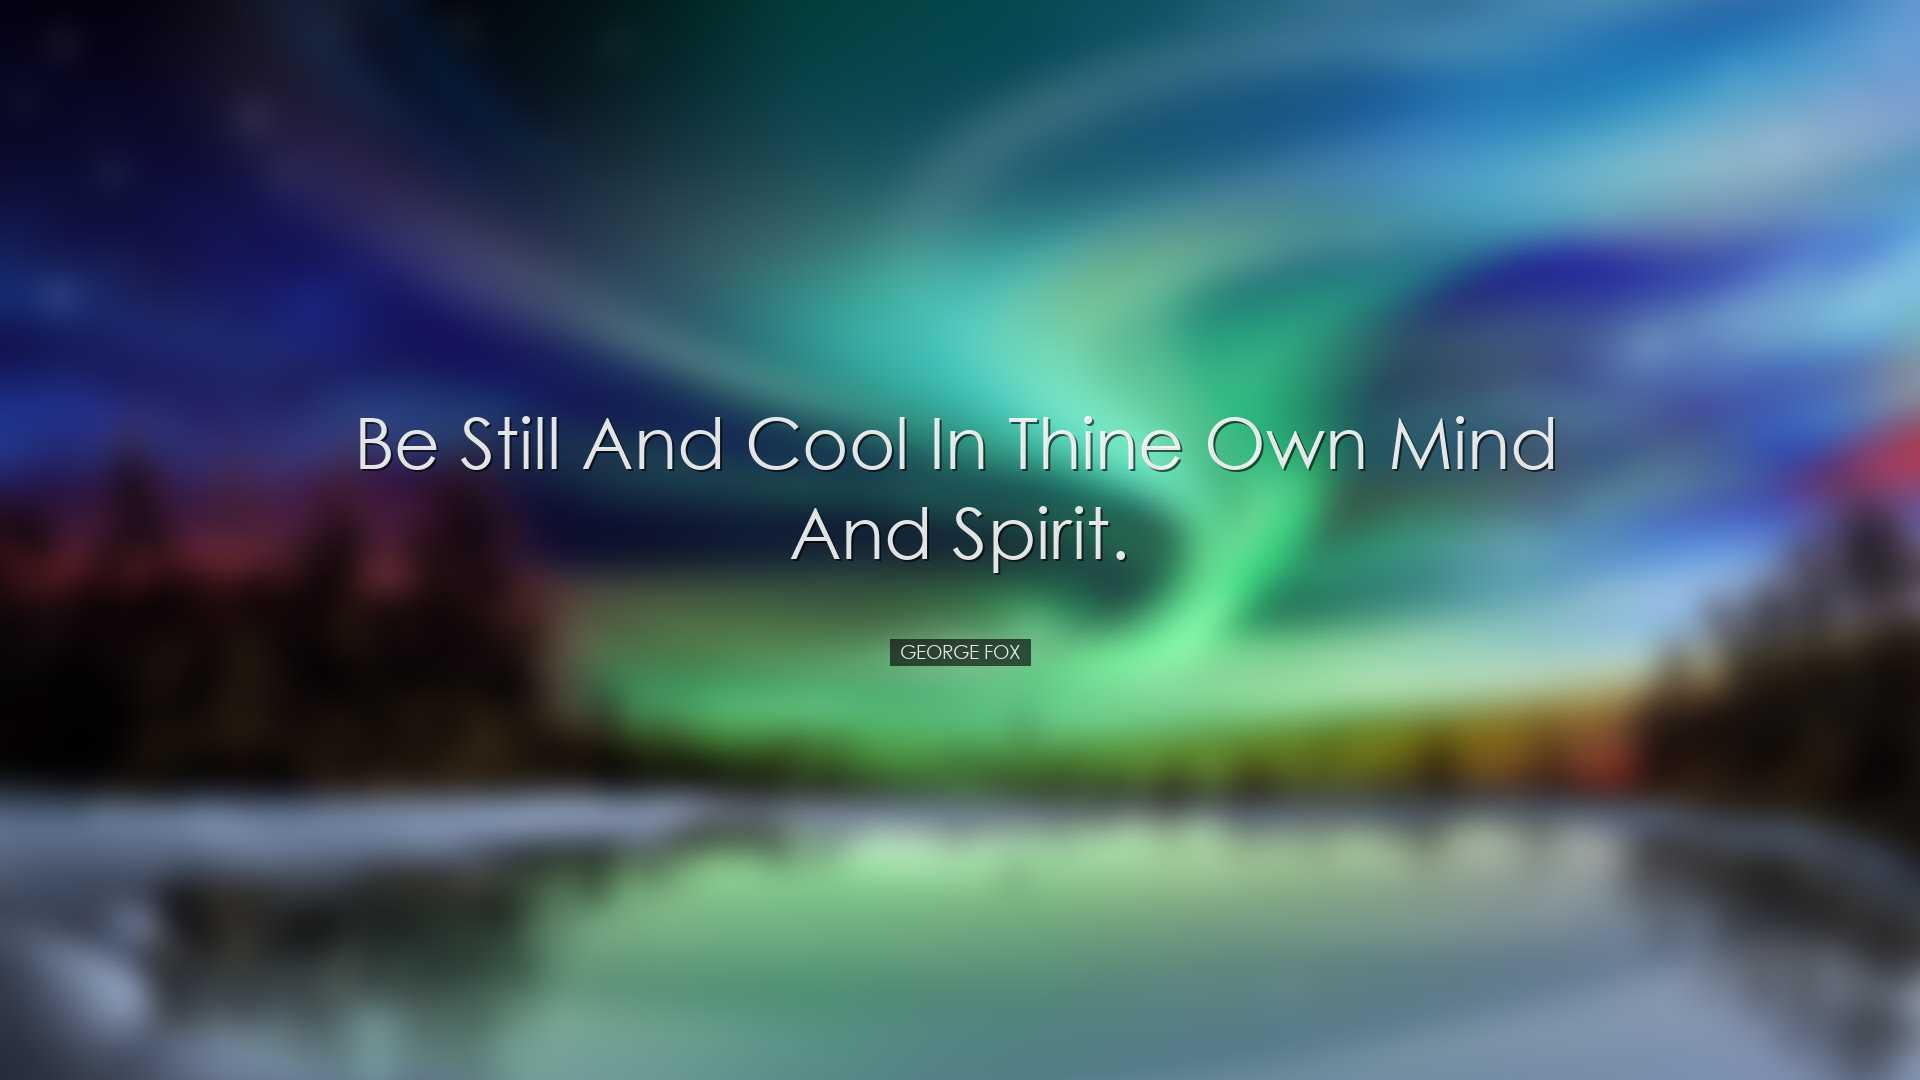 Be still and cool in thine own mind and spirit. - George Fox